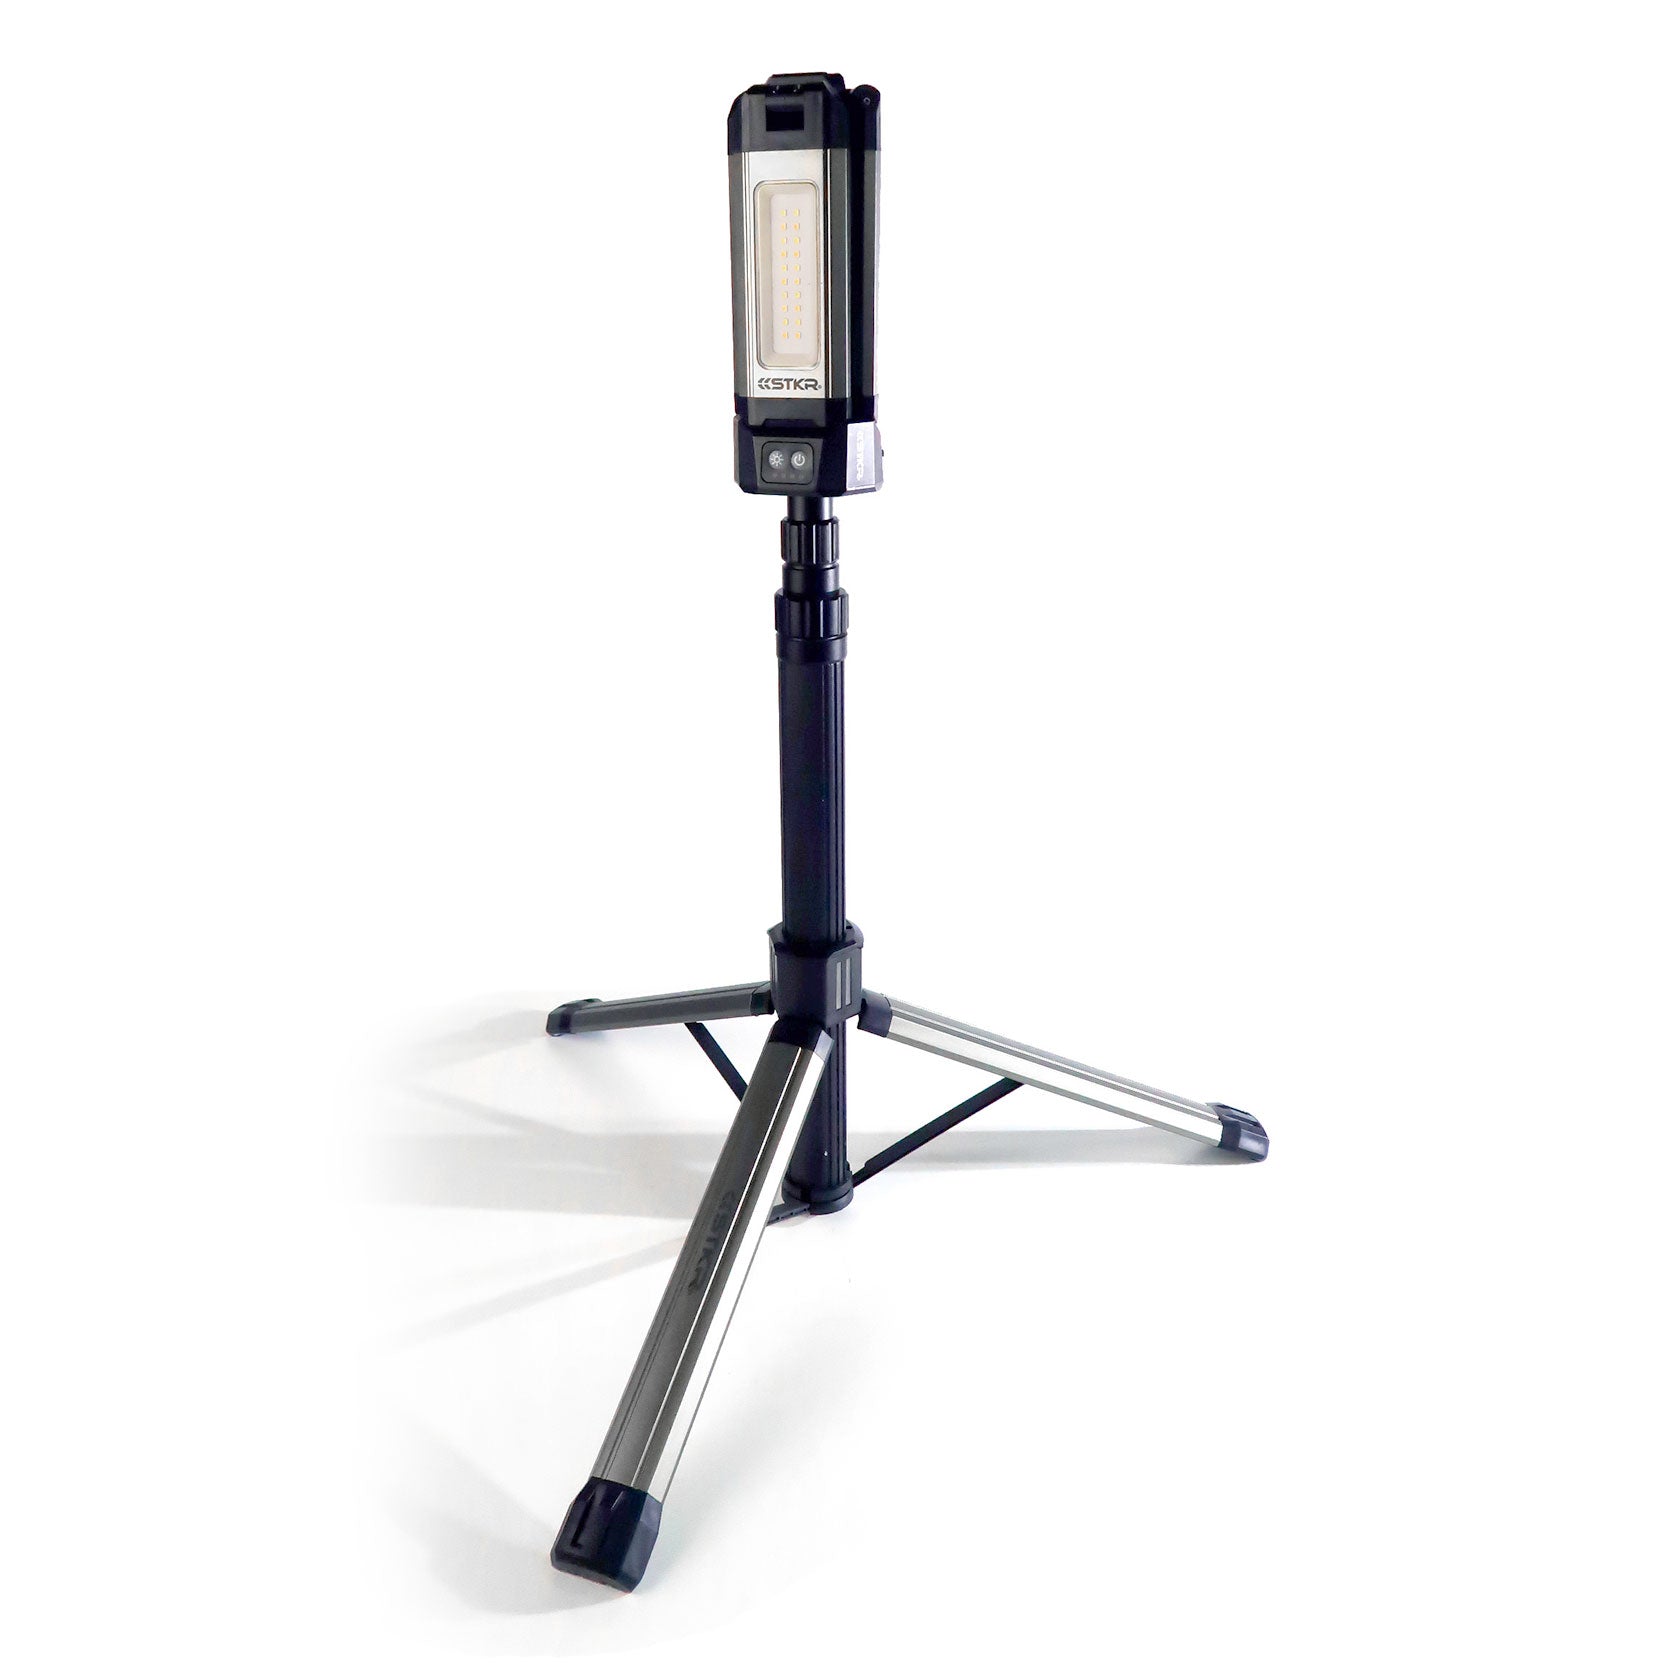 TRi-Mobile Area Work Light - Rechargeable Shoplight with Triple Pivoting LED Light Heads by STKR Concepts - main image